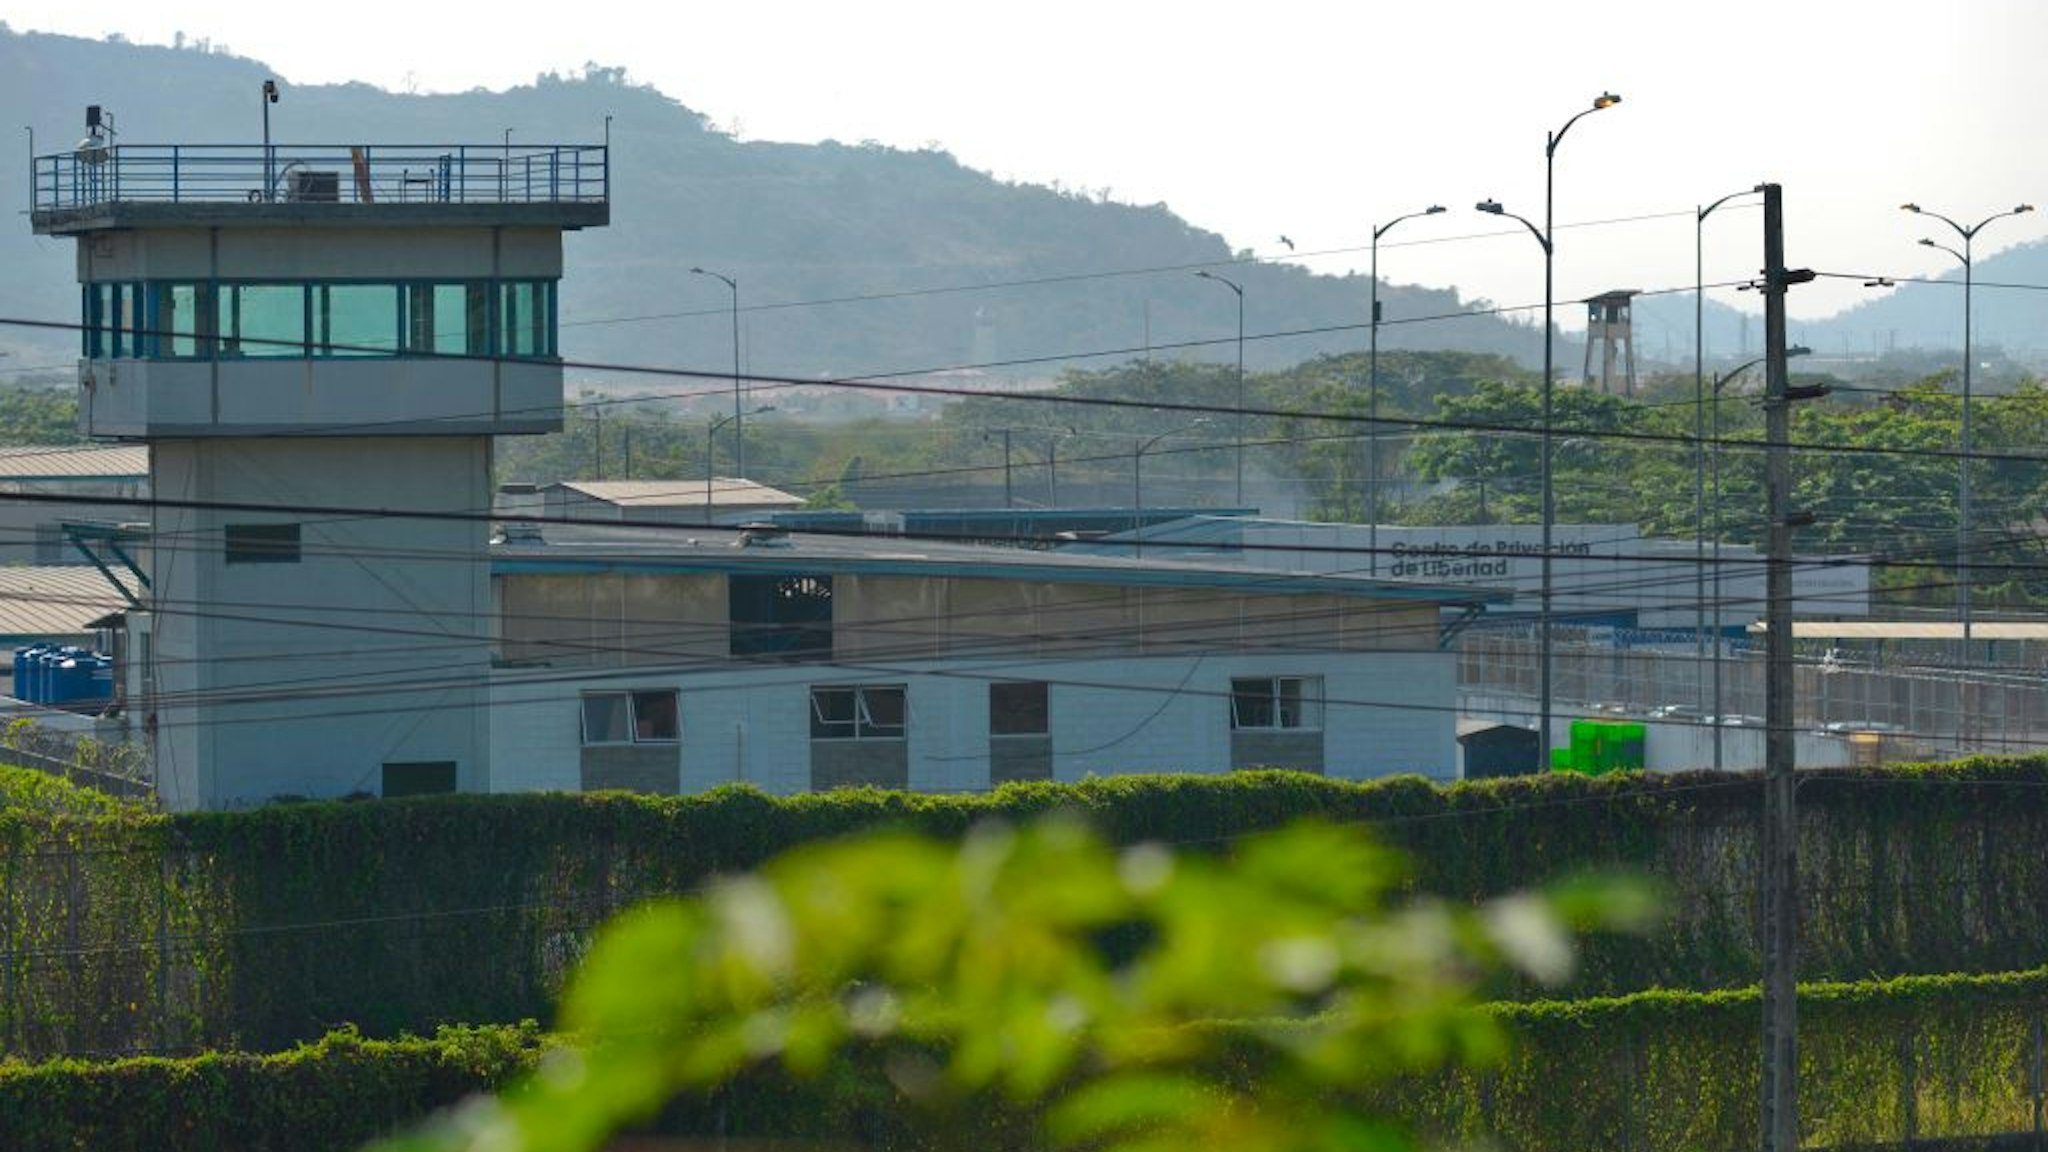 General view of the Guayas 1 prison on the outskirts of Guayaquil, Ecuador, taken on October 1, 2021 a day after police gained control following a riot between inmates which left at least 118 dead. - Police gained control of the Ecuador prison on September 30 where rioting has left at least 118 inmates dead, some of them decapitated, as rival drug gangs went to war armed with guns and grenades. Another 86 inmates were wounded, six of them critically, according to Ecuador's prisons authority, in one of the deadliest prison battles in South American history.